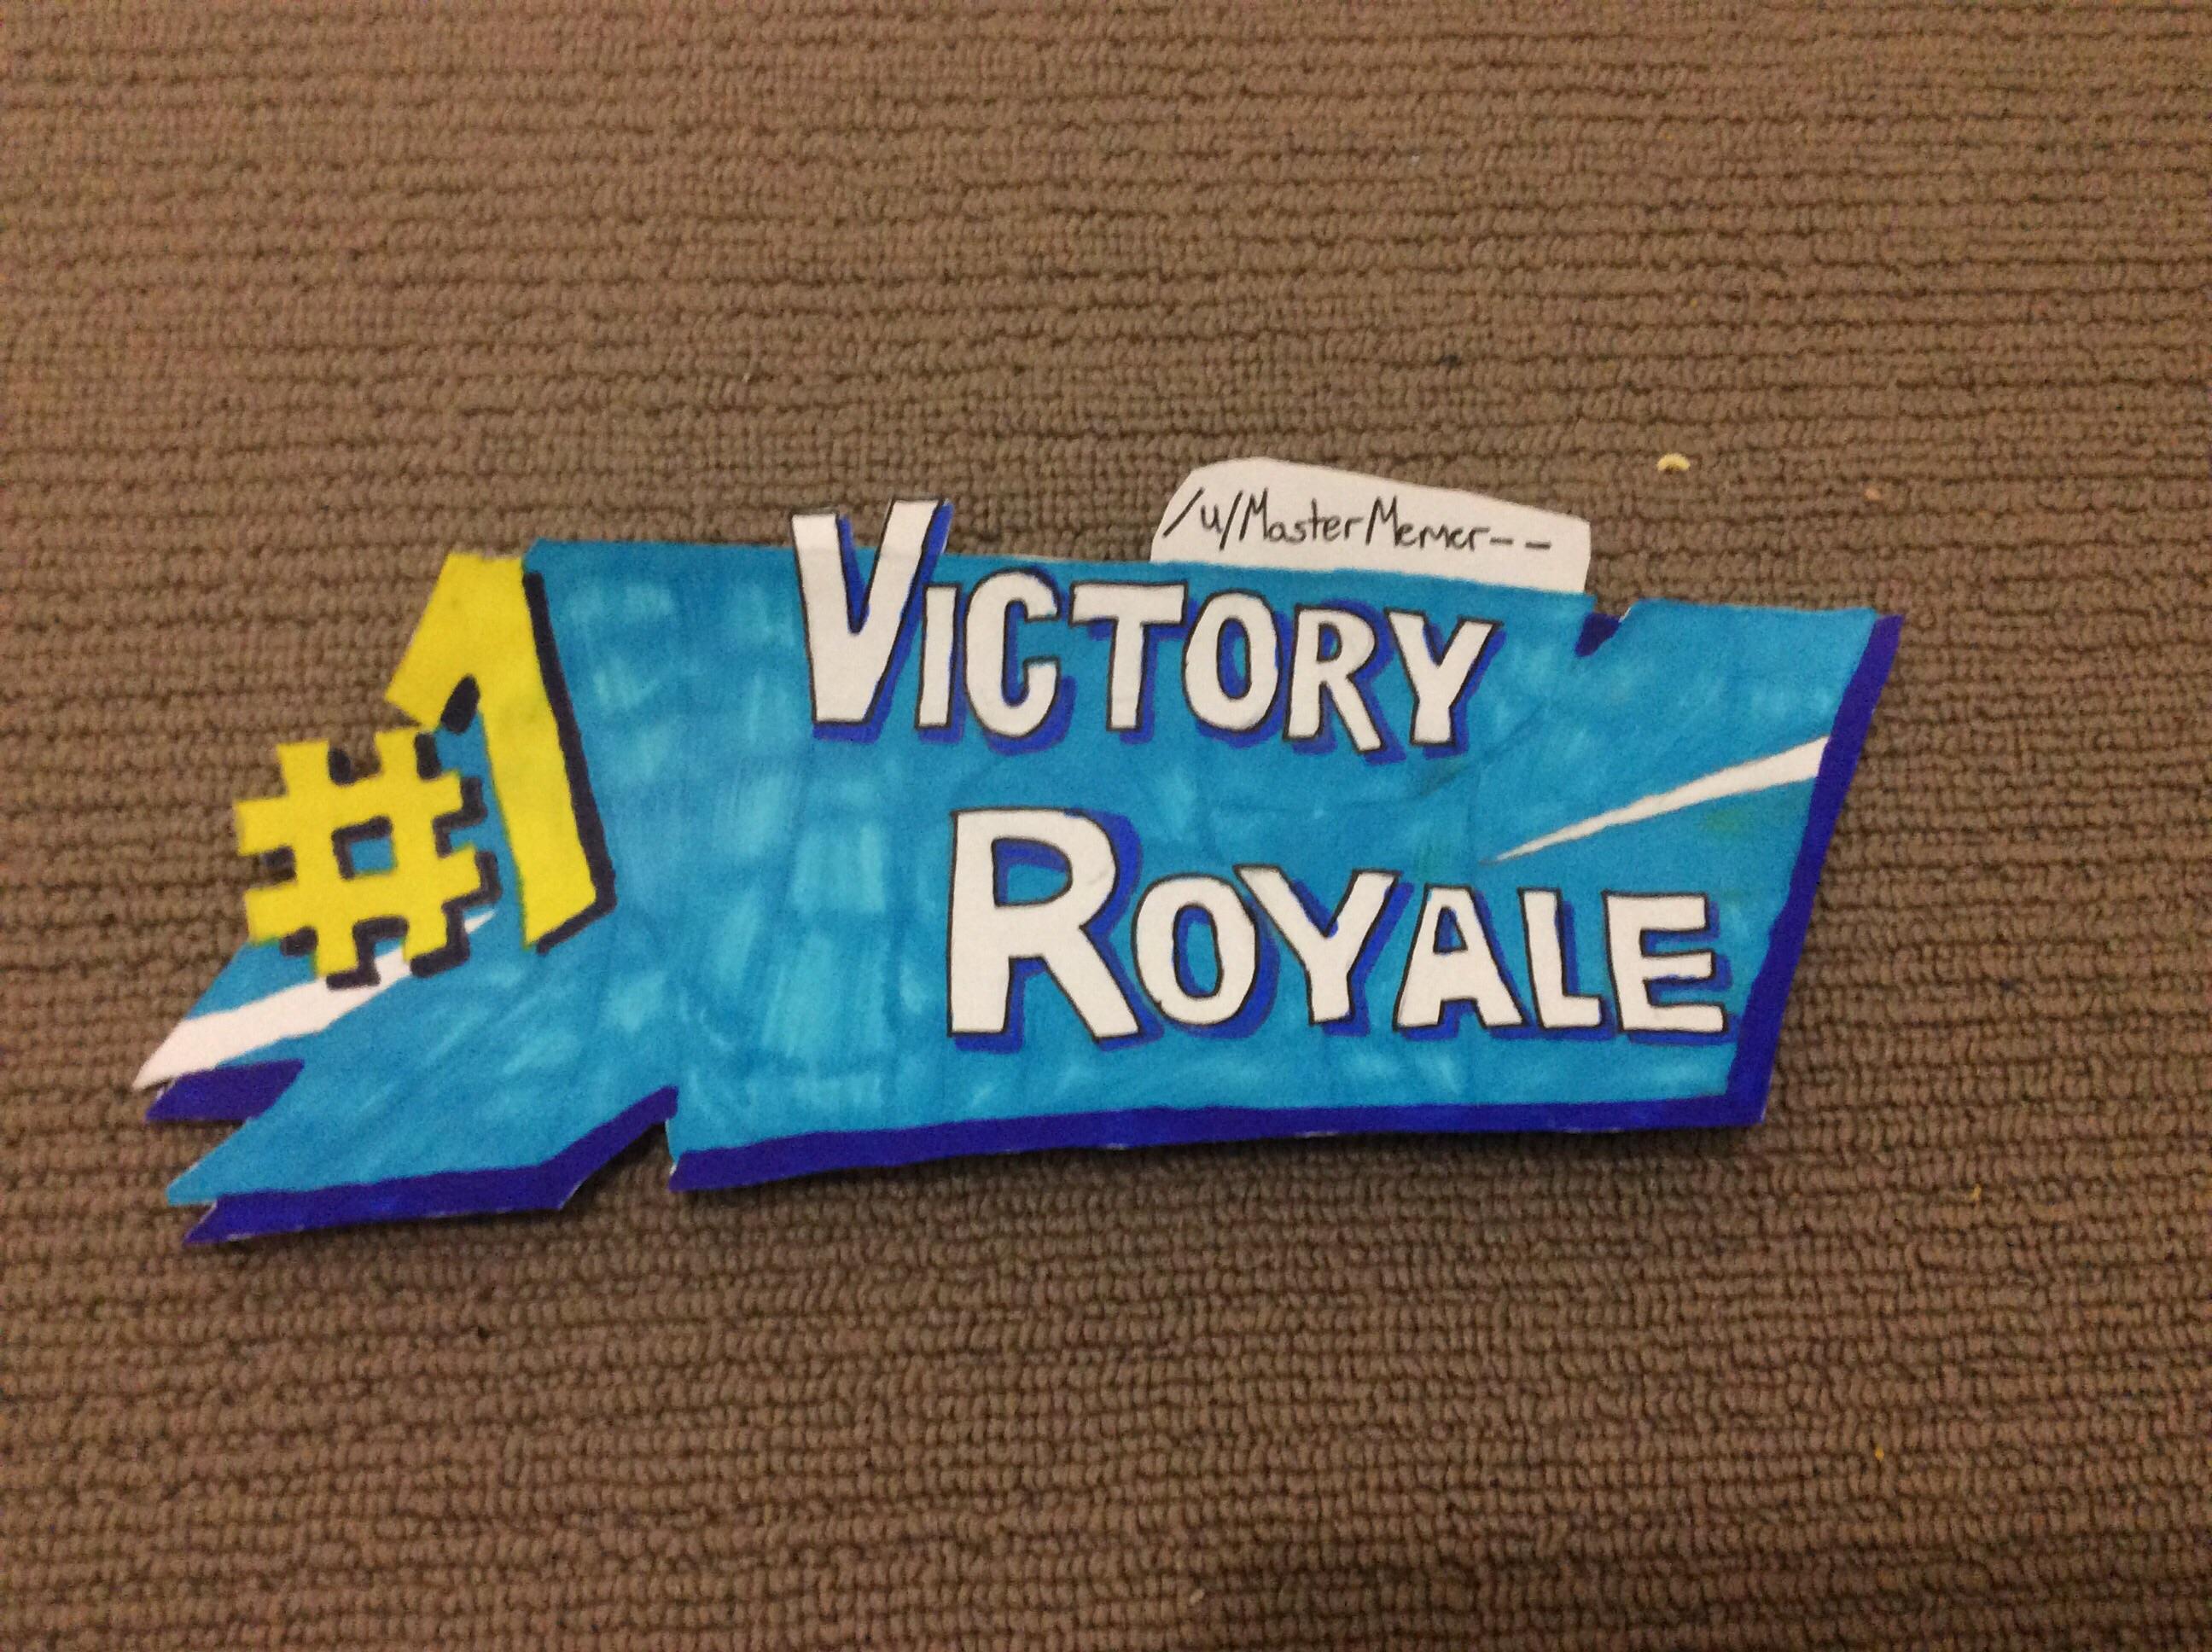 Royale Logo - I attempted to draw the Victory Royale logo